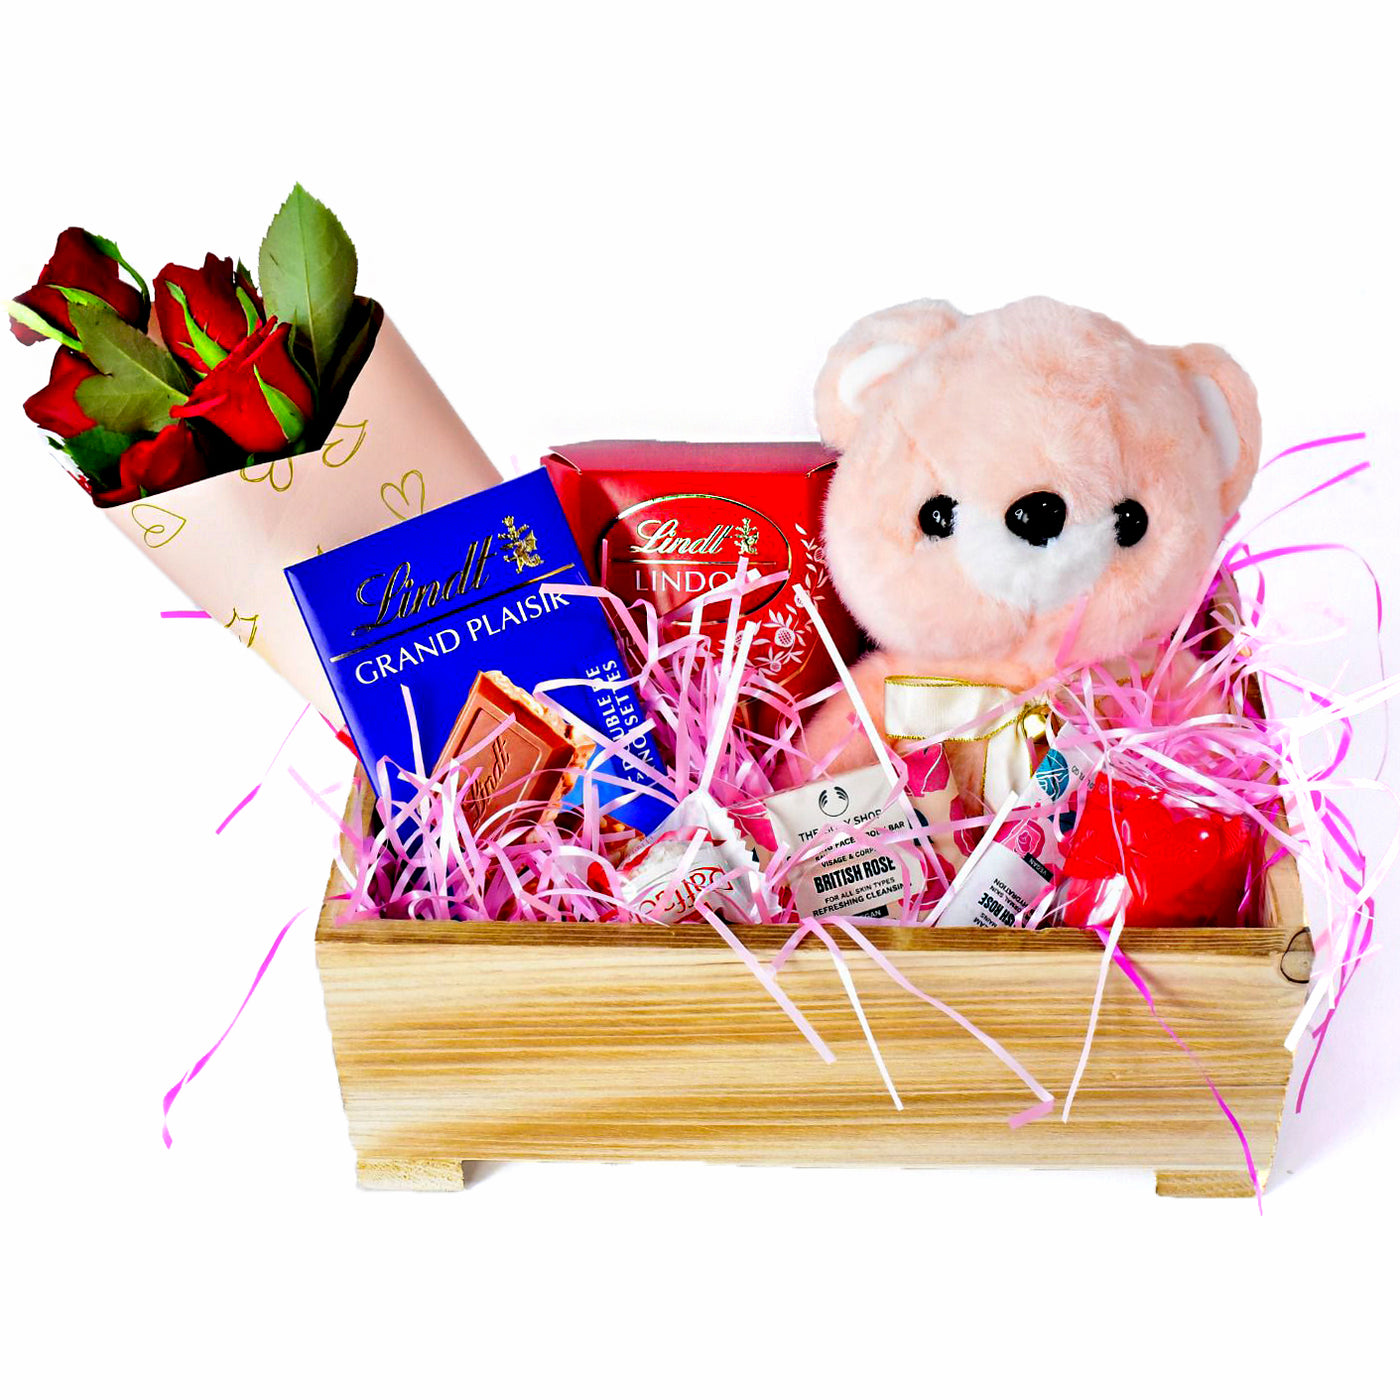 Valentines-Hamper-Heart-Box-Teddy-Bear-for-Her-DodoMarket-Delivery-Mauritius